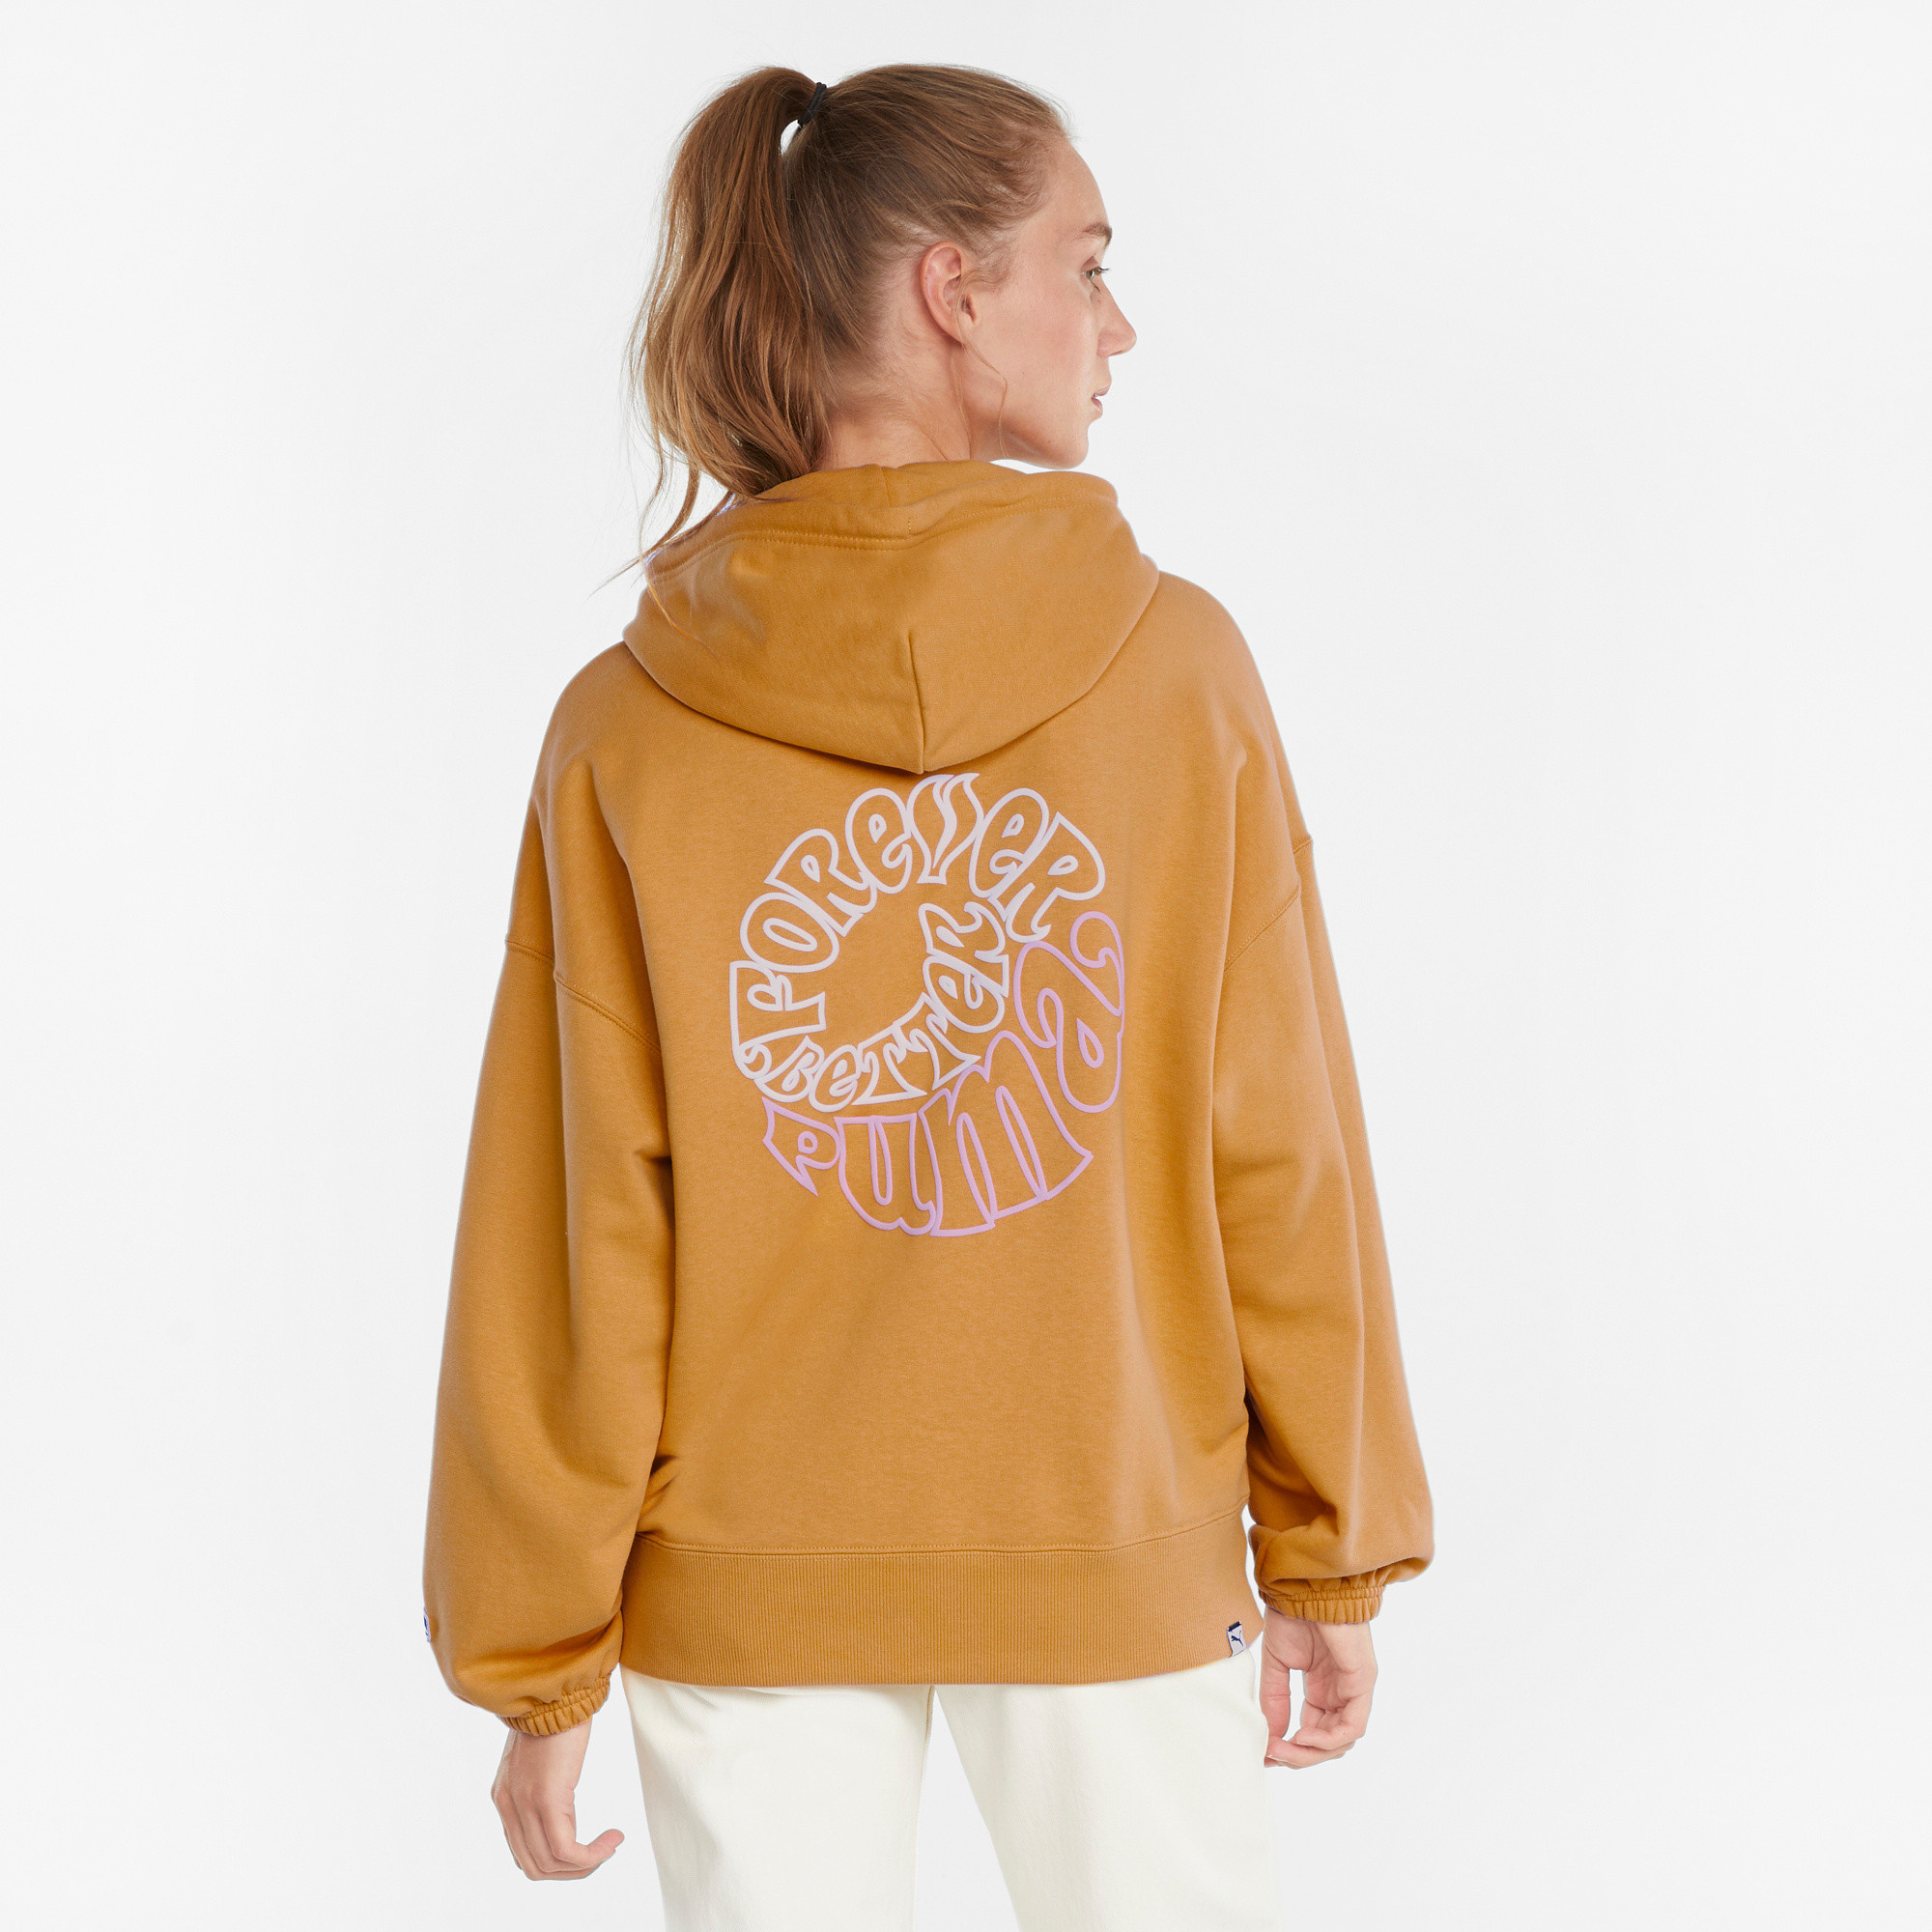 Downtown Graphic Hoodie, Yellow, large image number 3